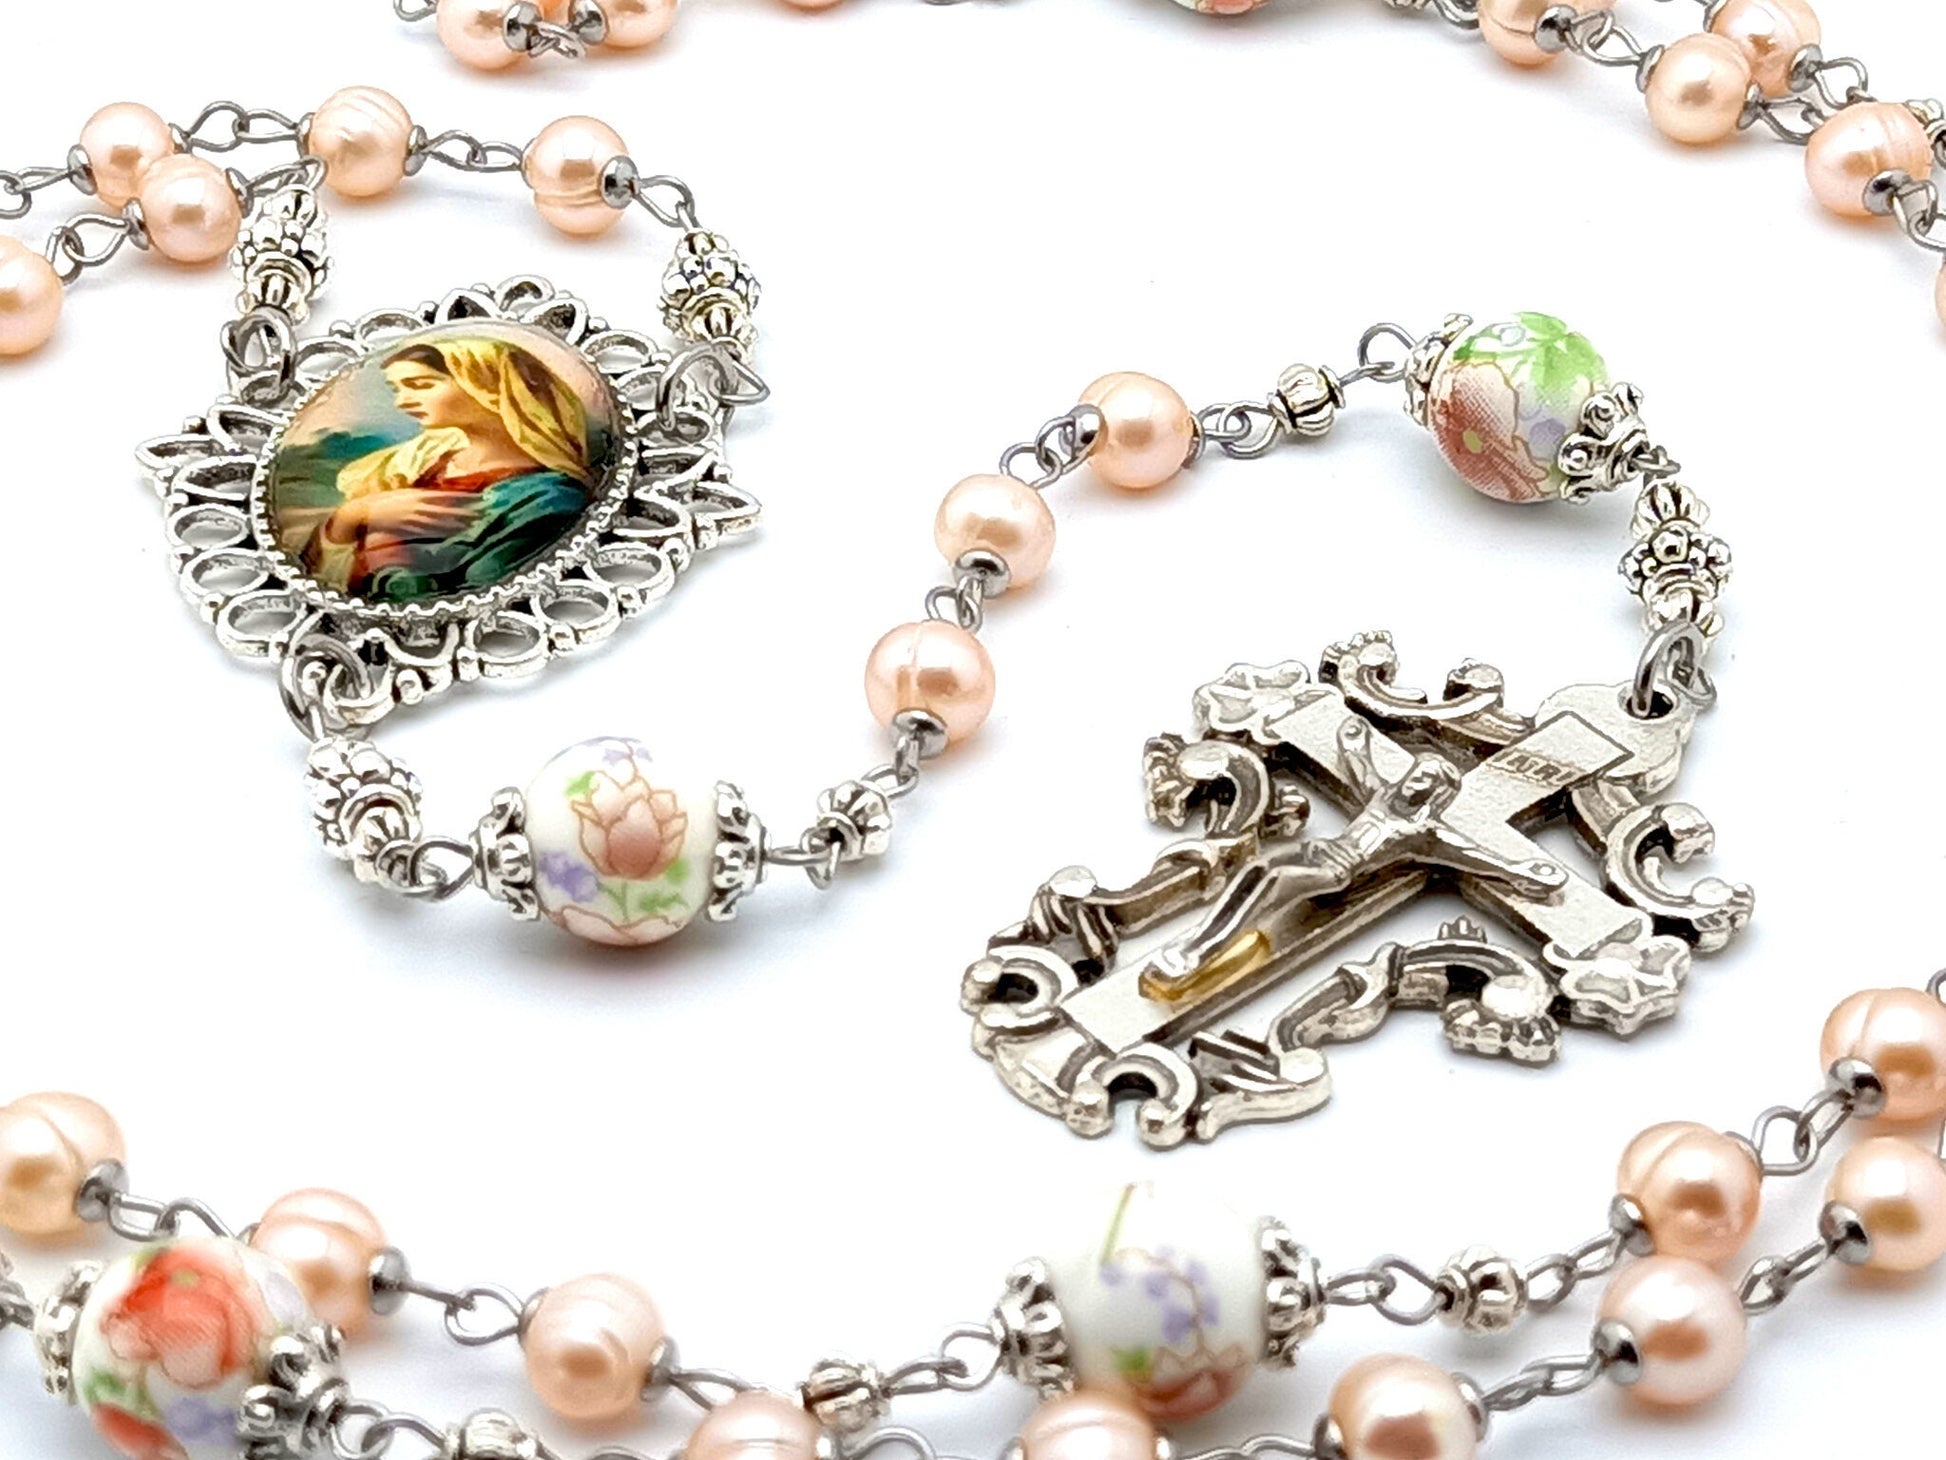 Fiat of the Blessed Virgin Mary unique rosary beads with freshwater pearls and porcelain beads, silver filigree crucifix and picture centre medal.